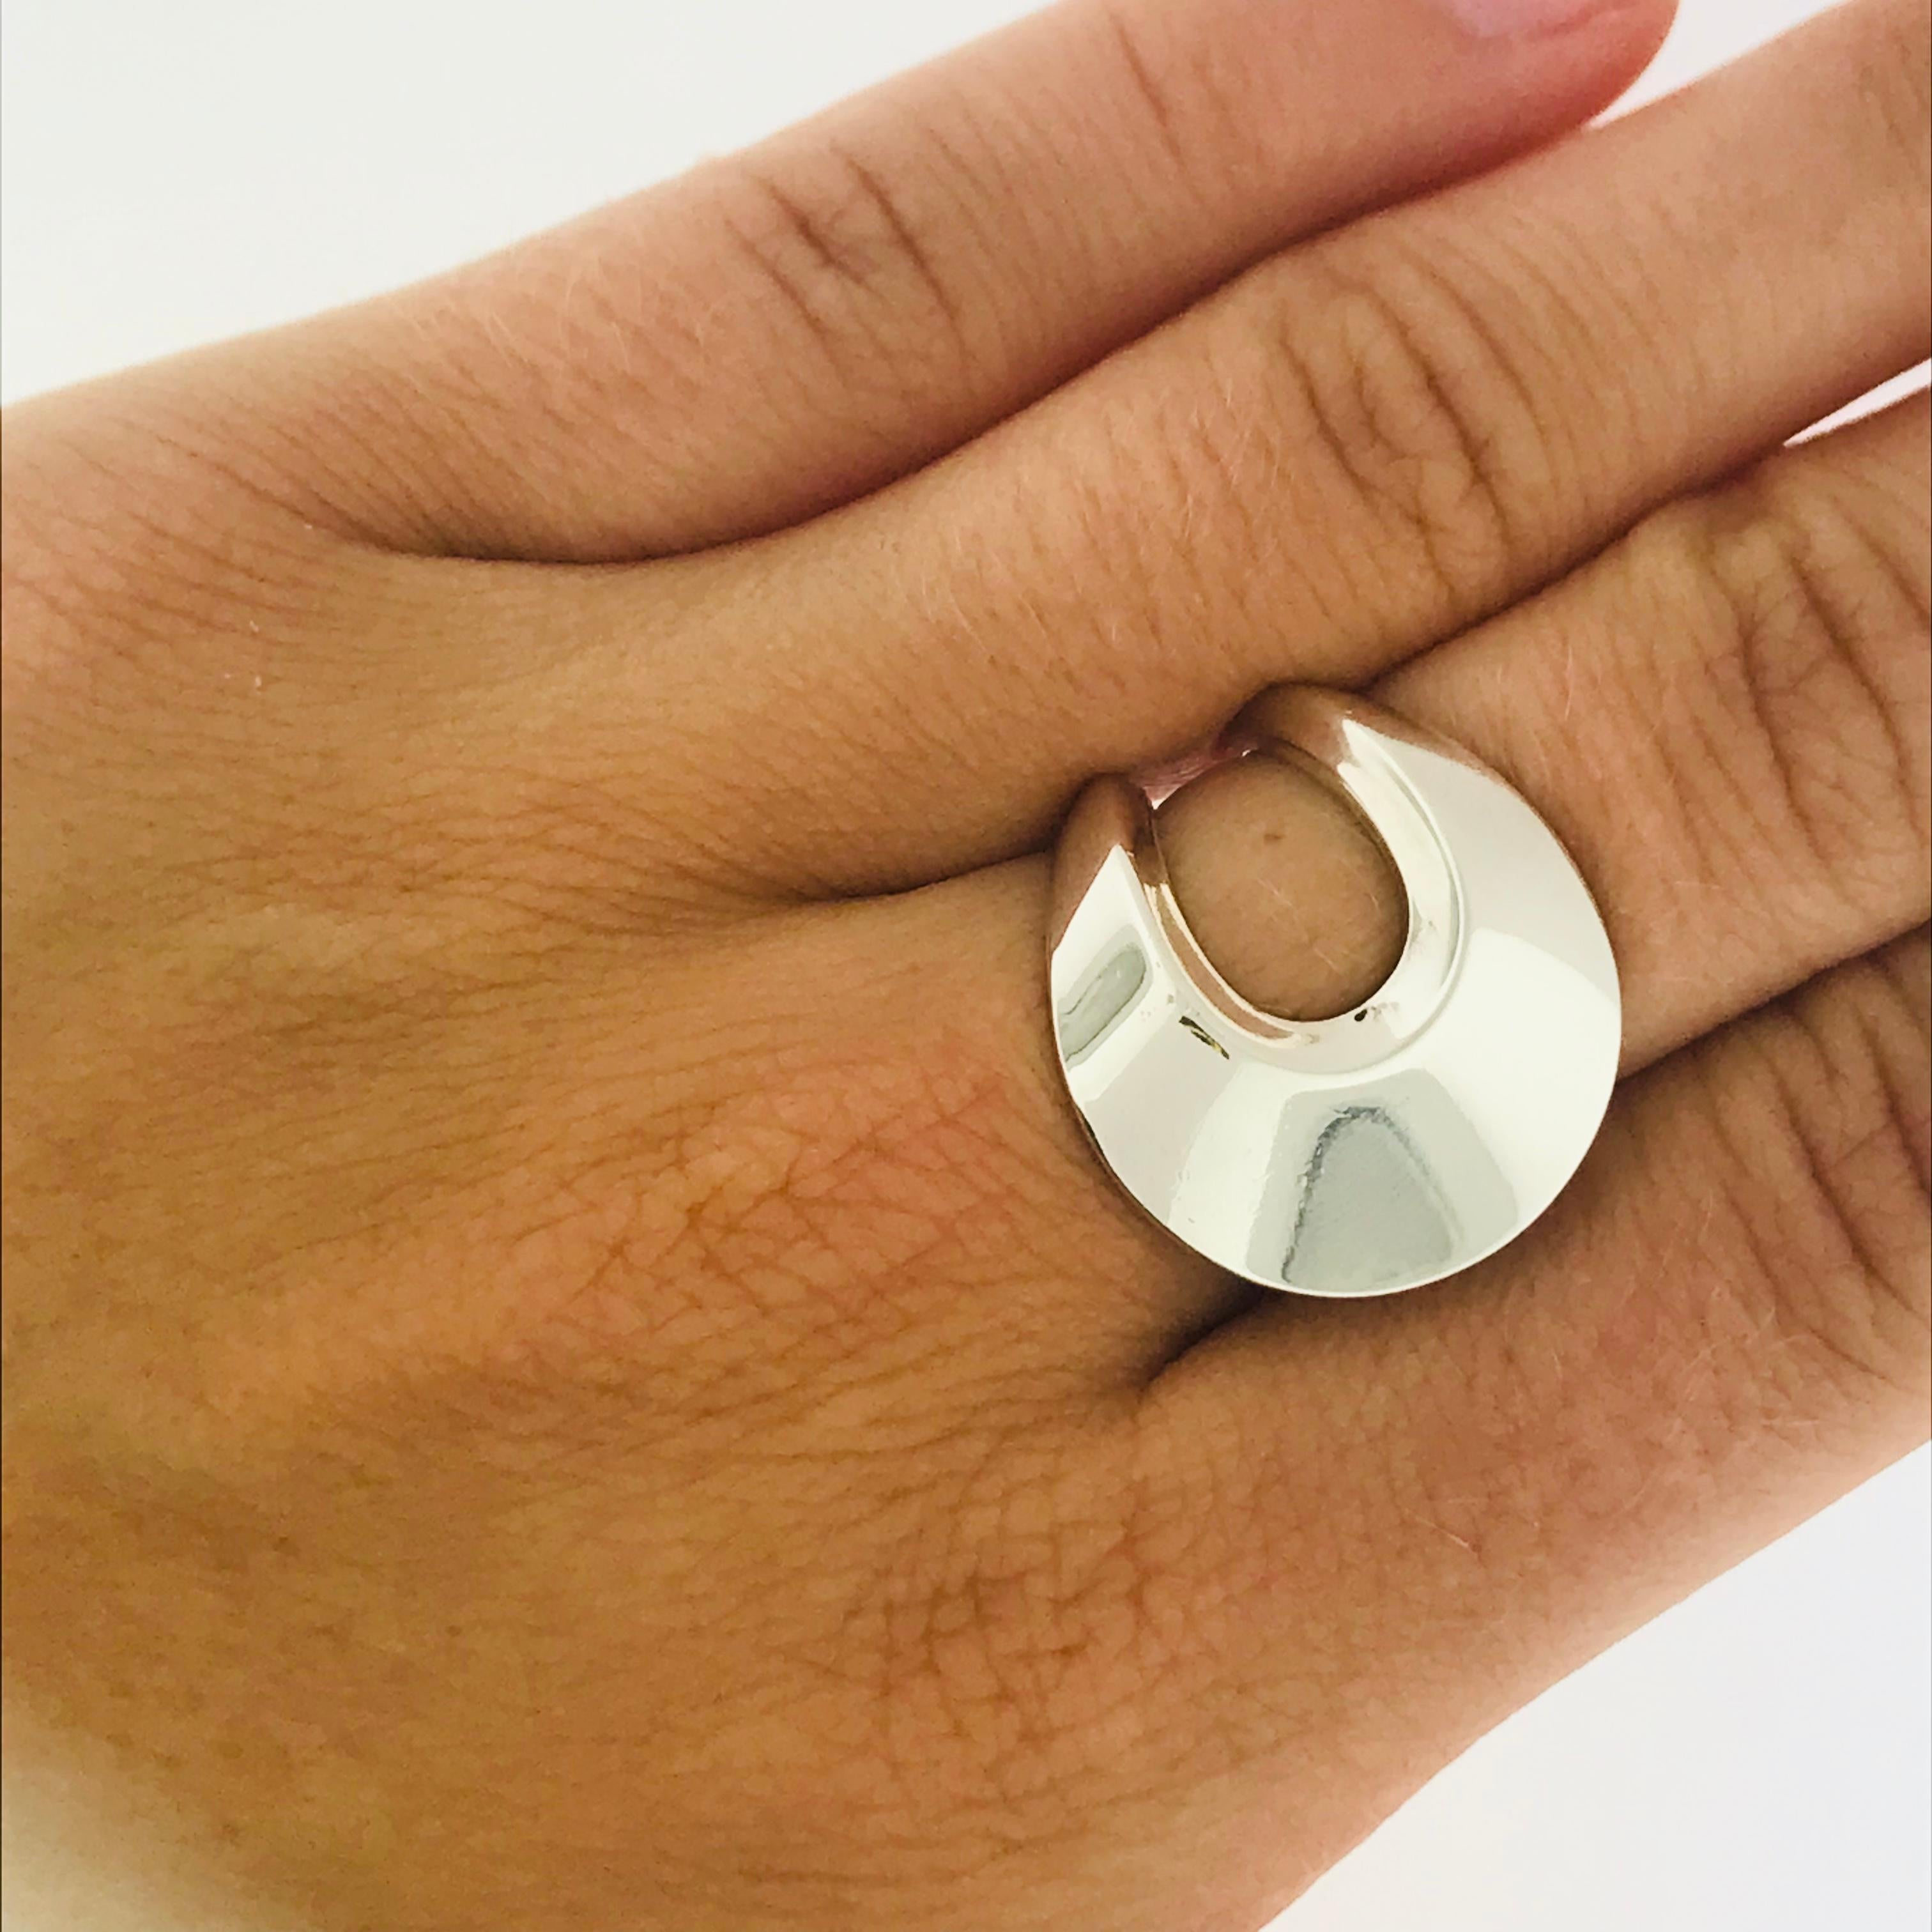 The David Andersen Modernist Ring is a great addition to any jewelry collection. Made in sterling silver with an innovative and brilliant design. This ring looks great on any hand, worn on any finger! What a great ring to add some character to an